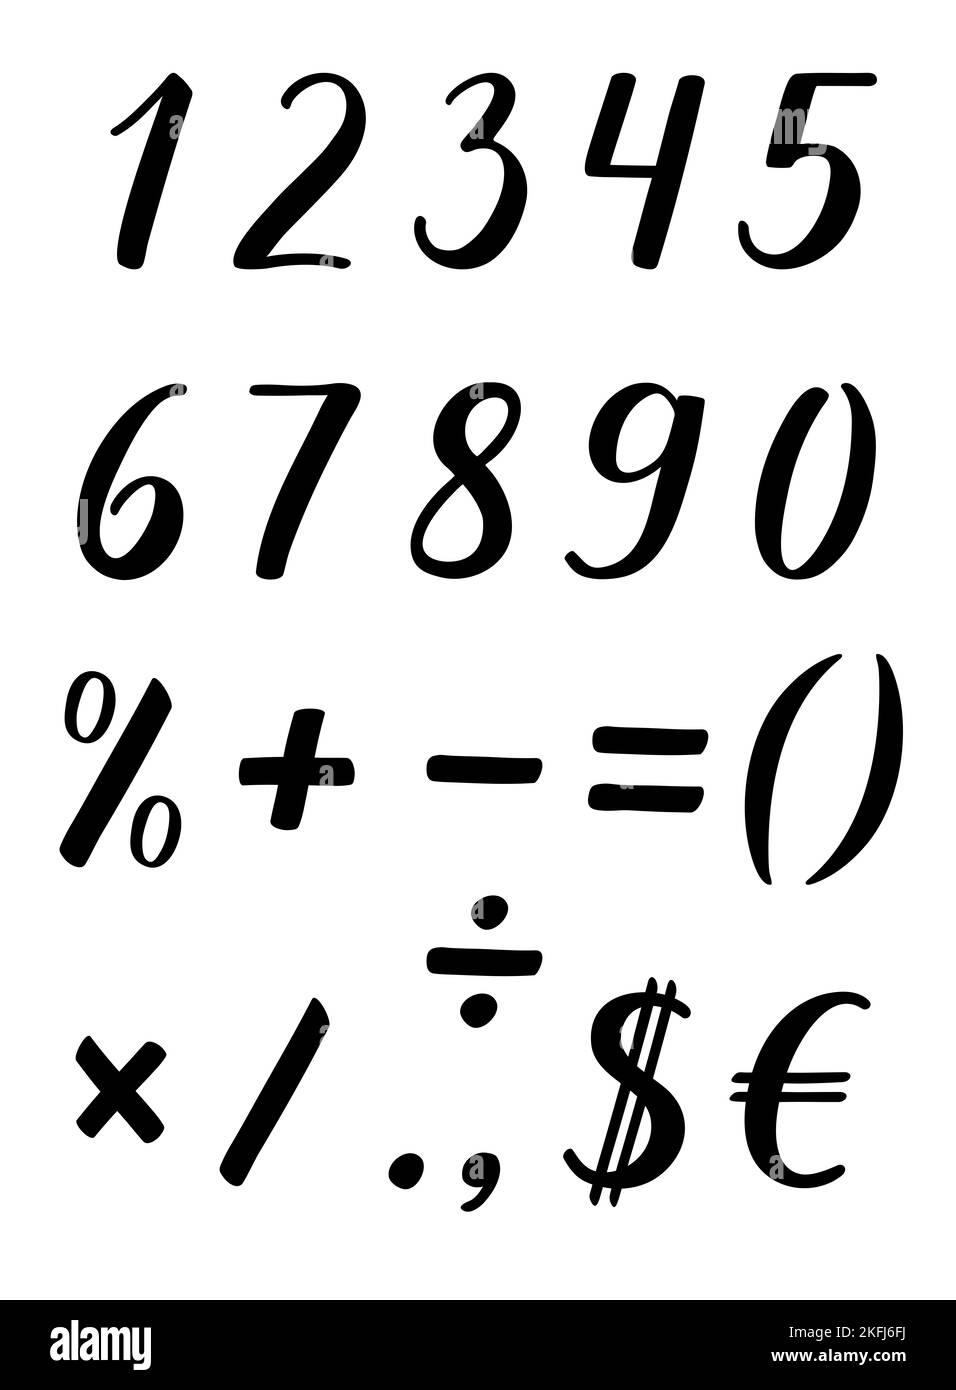 Numbers and percent, plus, minus, equals, brackets, multiplication and division signs, dot, comma, $ and €. Handwritten lettering modern  calligraphy. Stock Photo